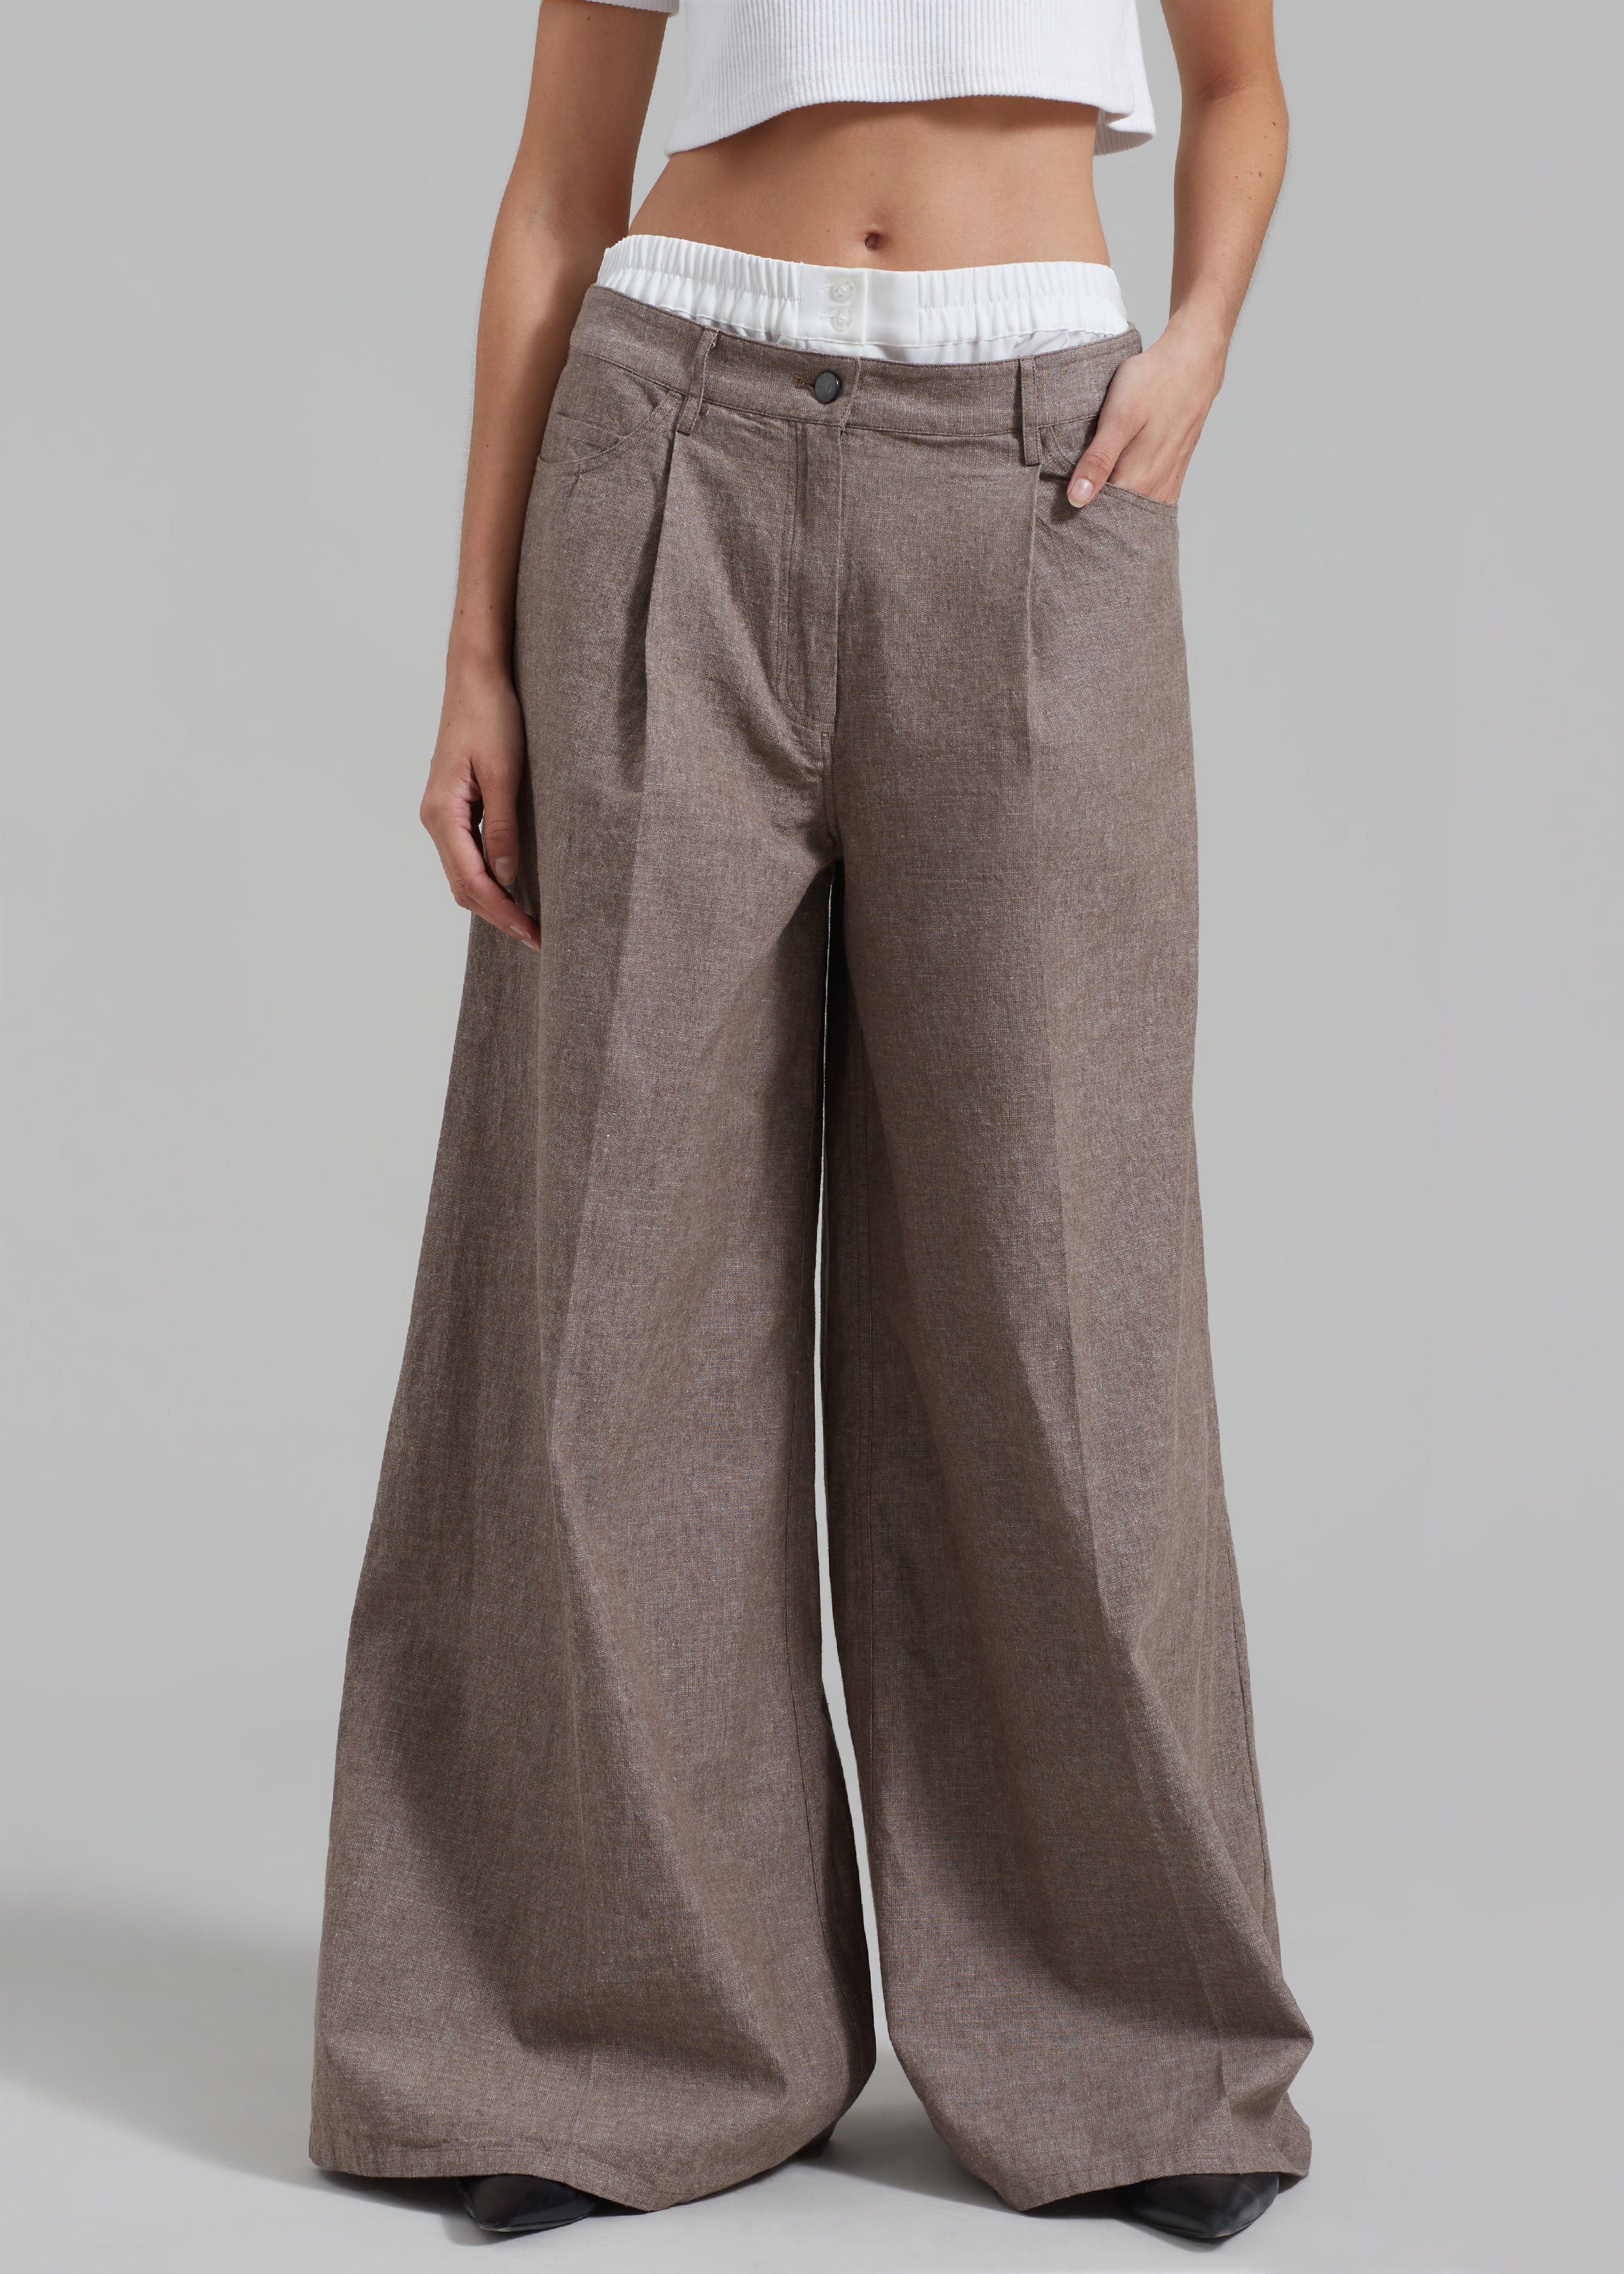 REMAIN Textured Wide Pants - Deep Taupe - 2